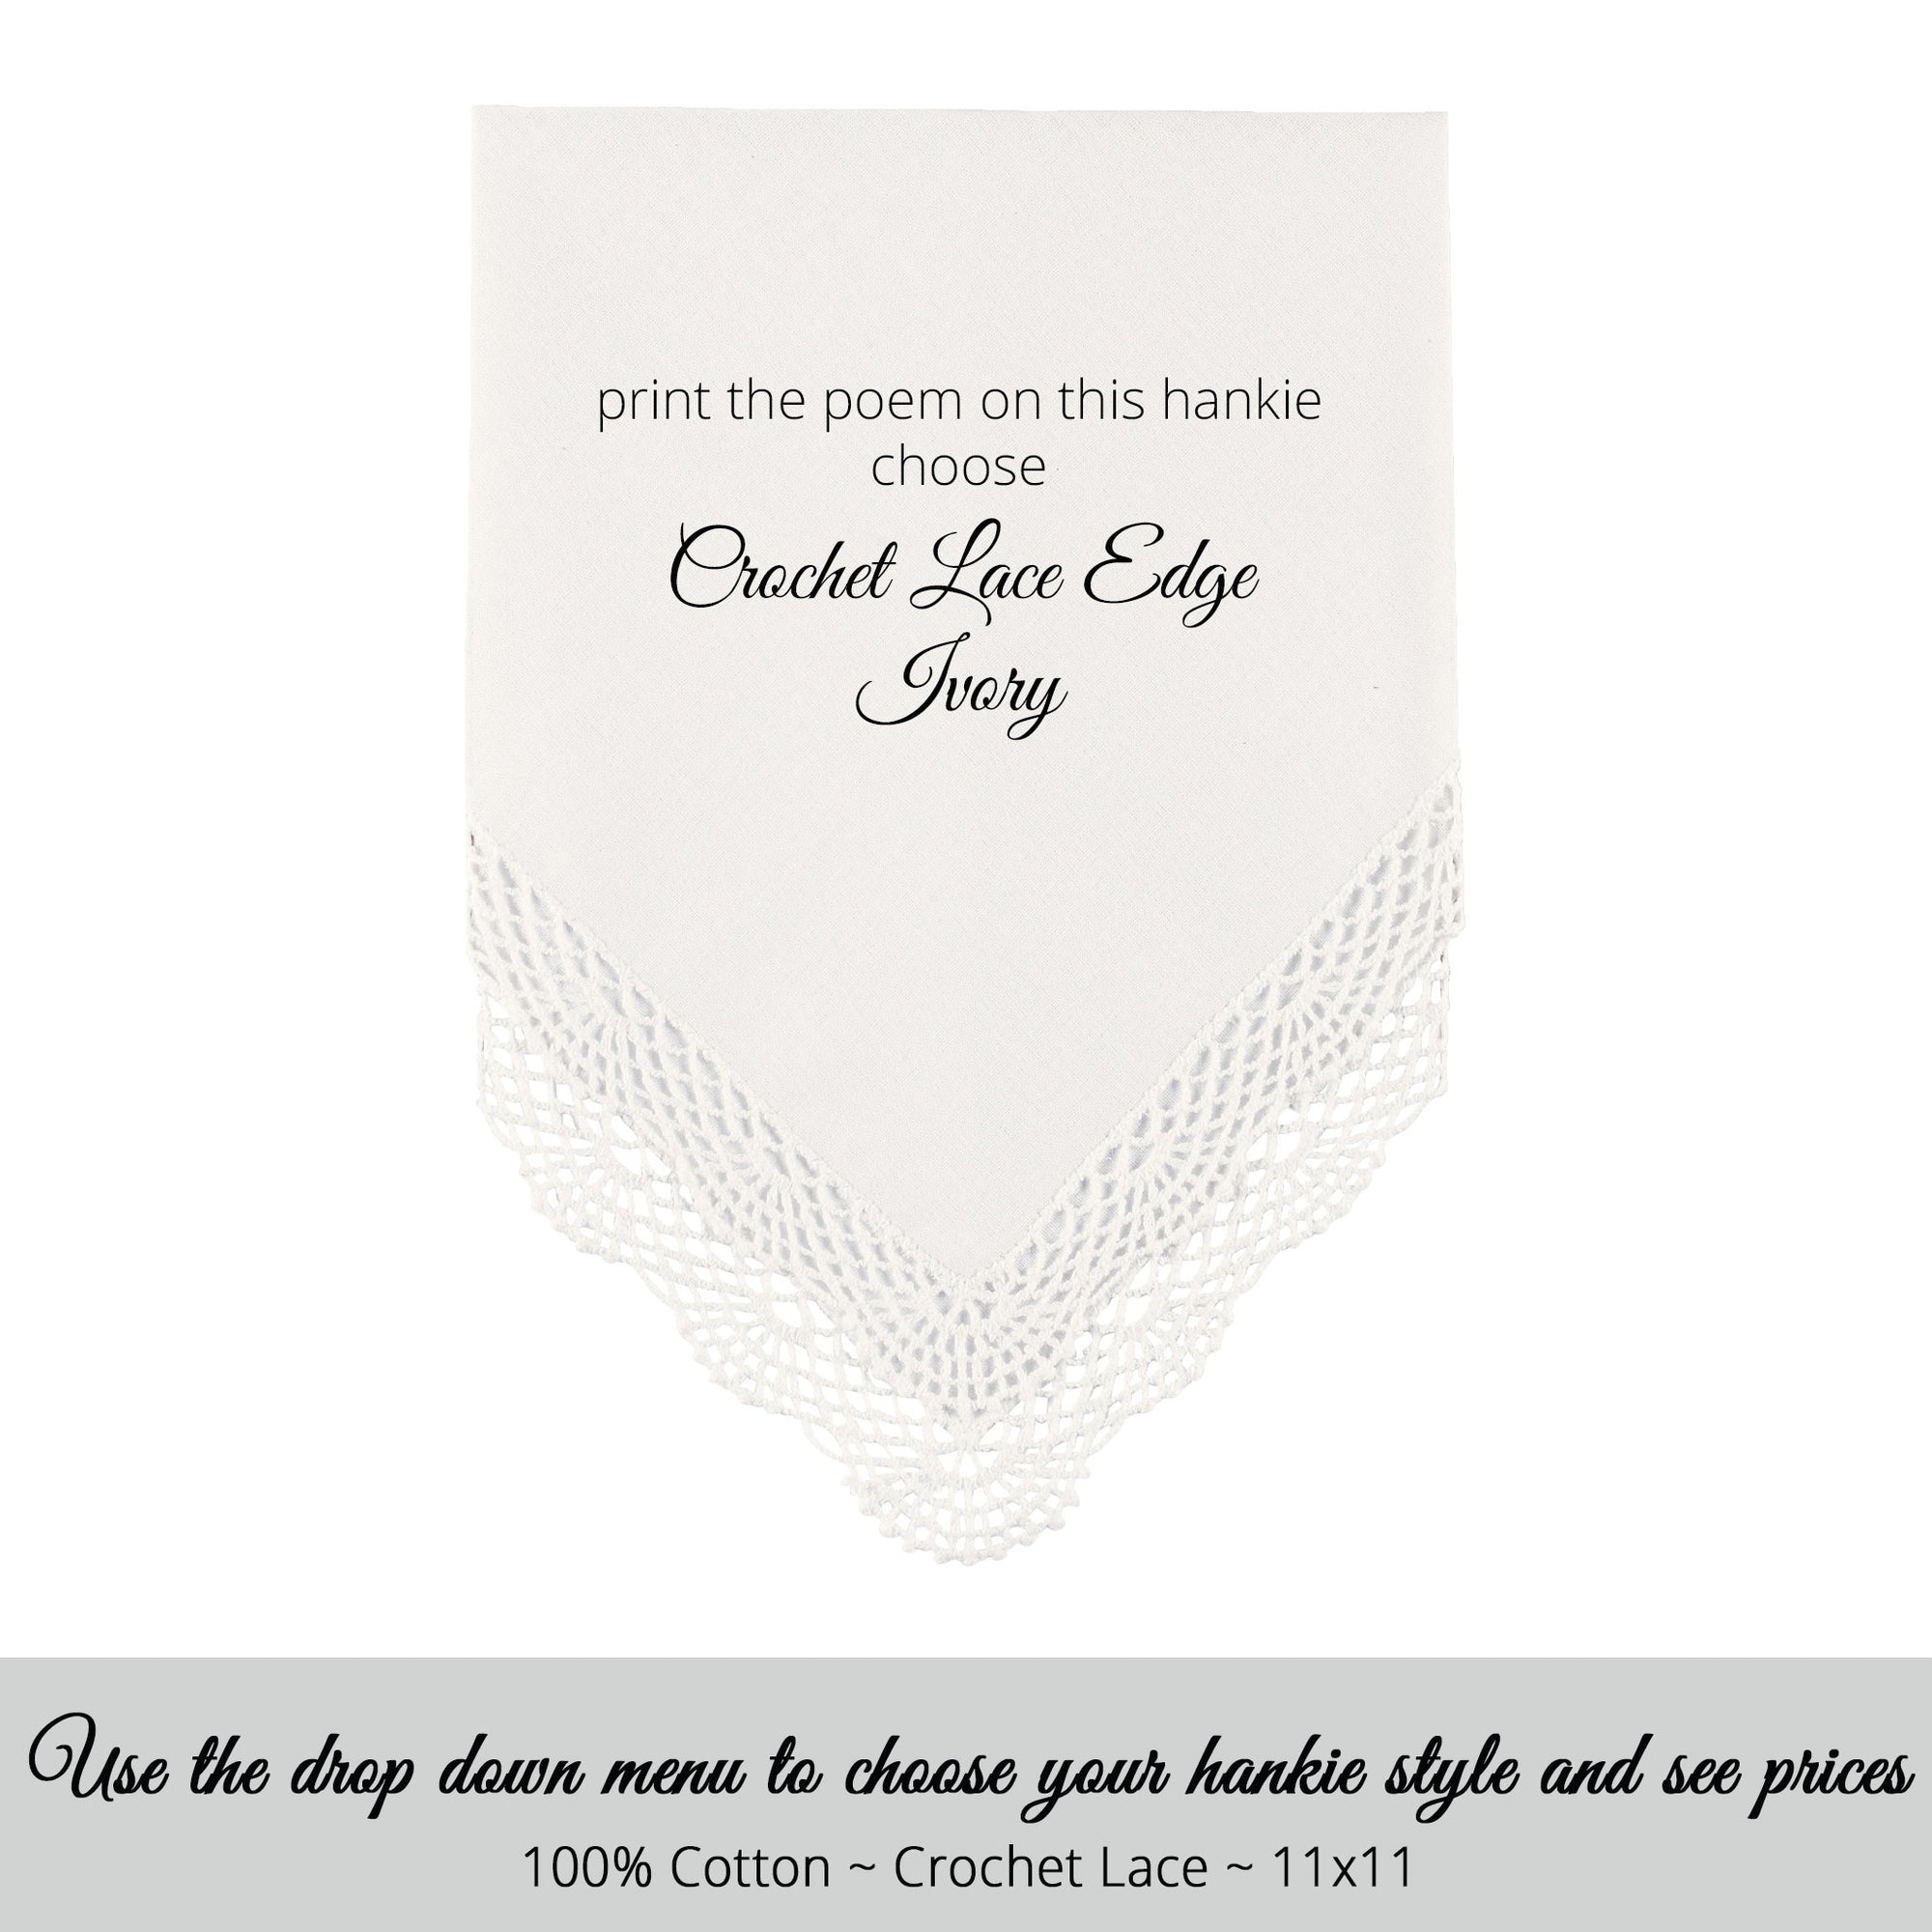 Wedding handkerchief ivory with crochet lace edge for the parents of the bride poem printed hankie